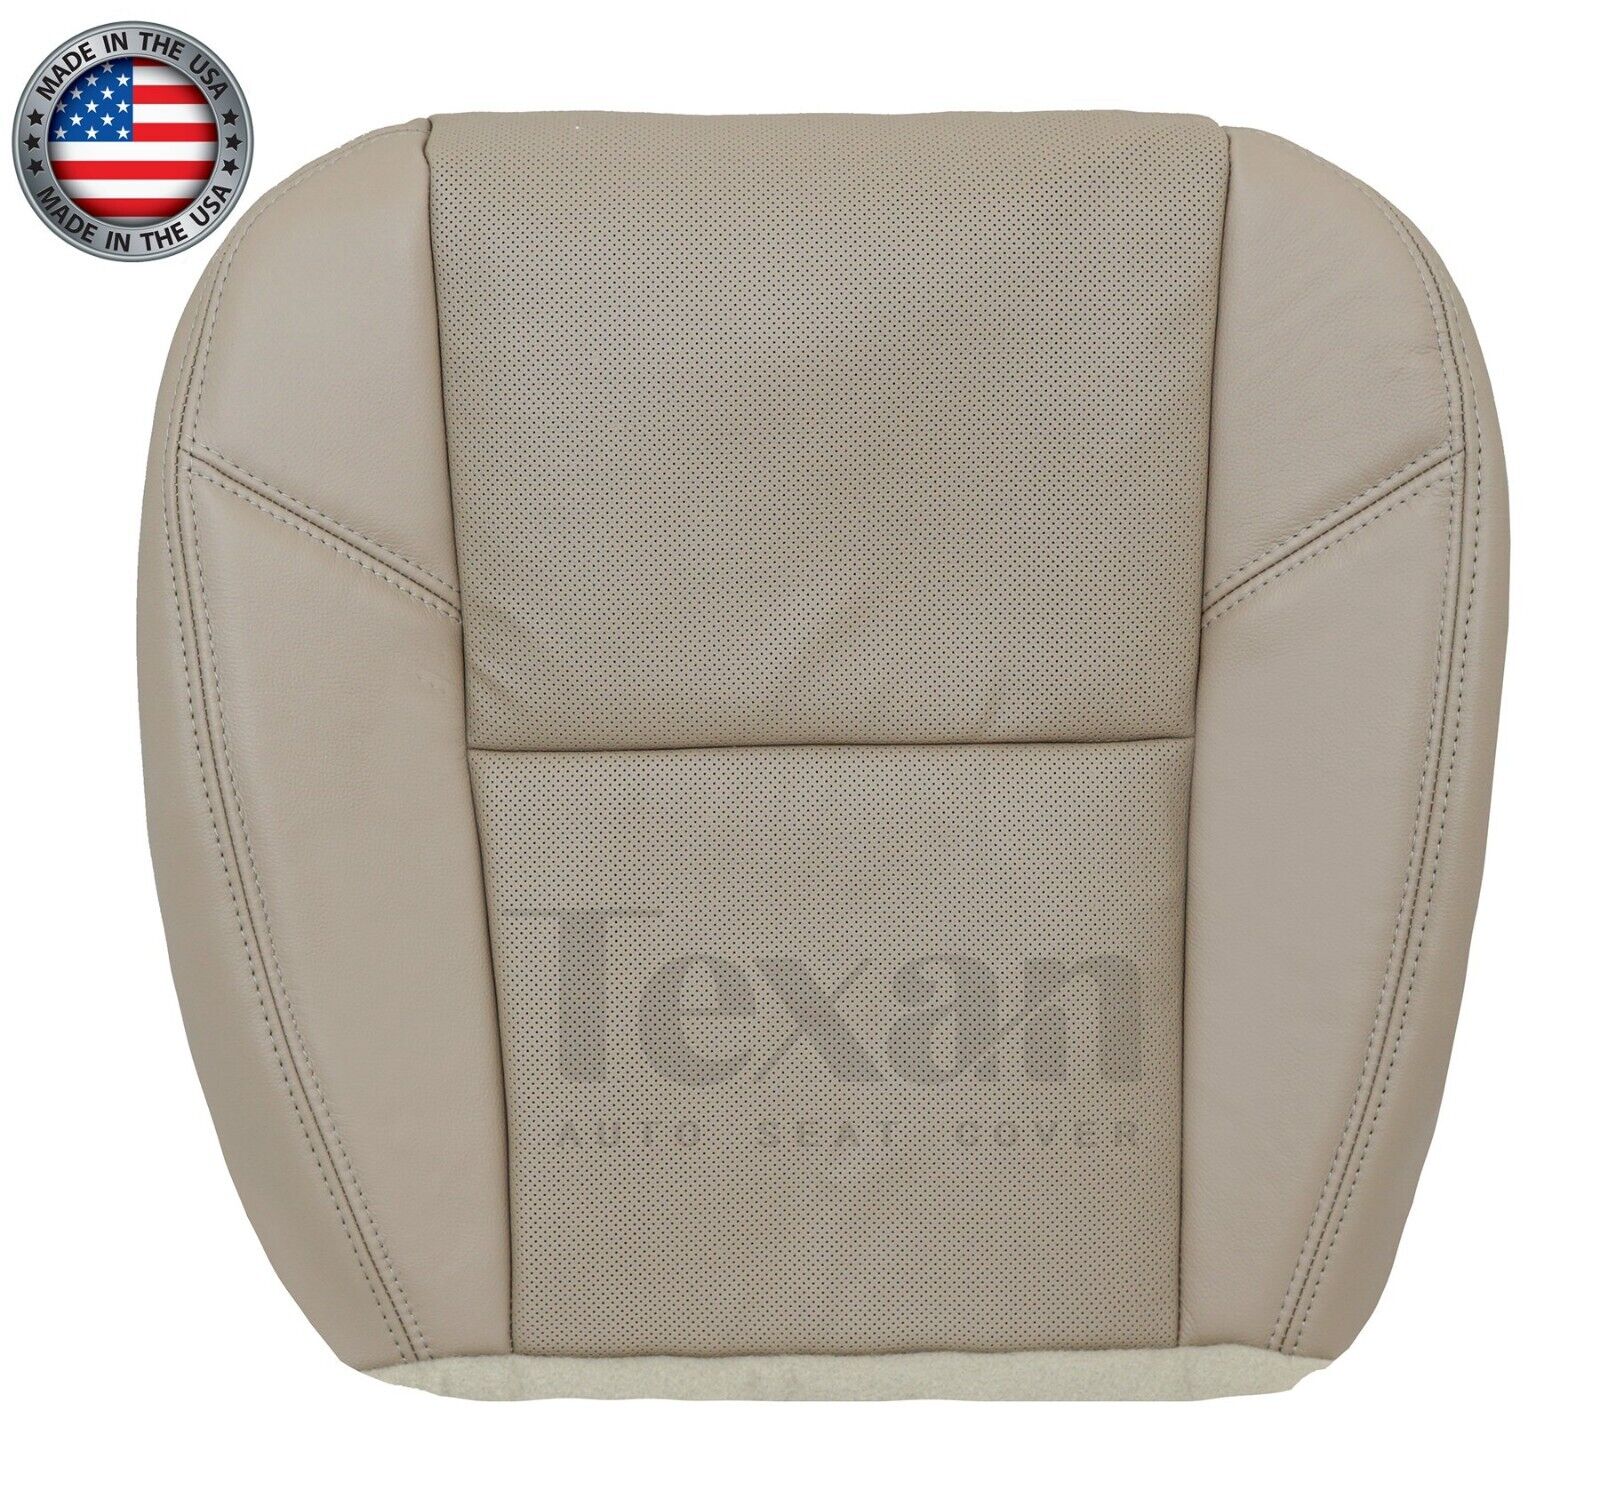 2009, 2020, 2011, 2012, 2013 Chevy Avalanche LTZ Passenger Bottom Leather Replacement Seat Cover Tan